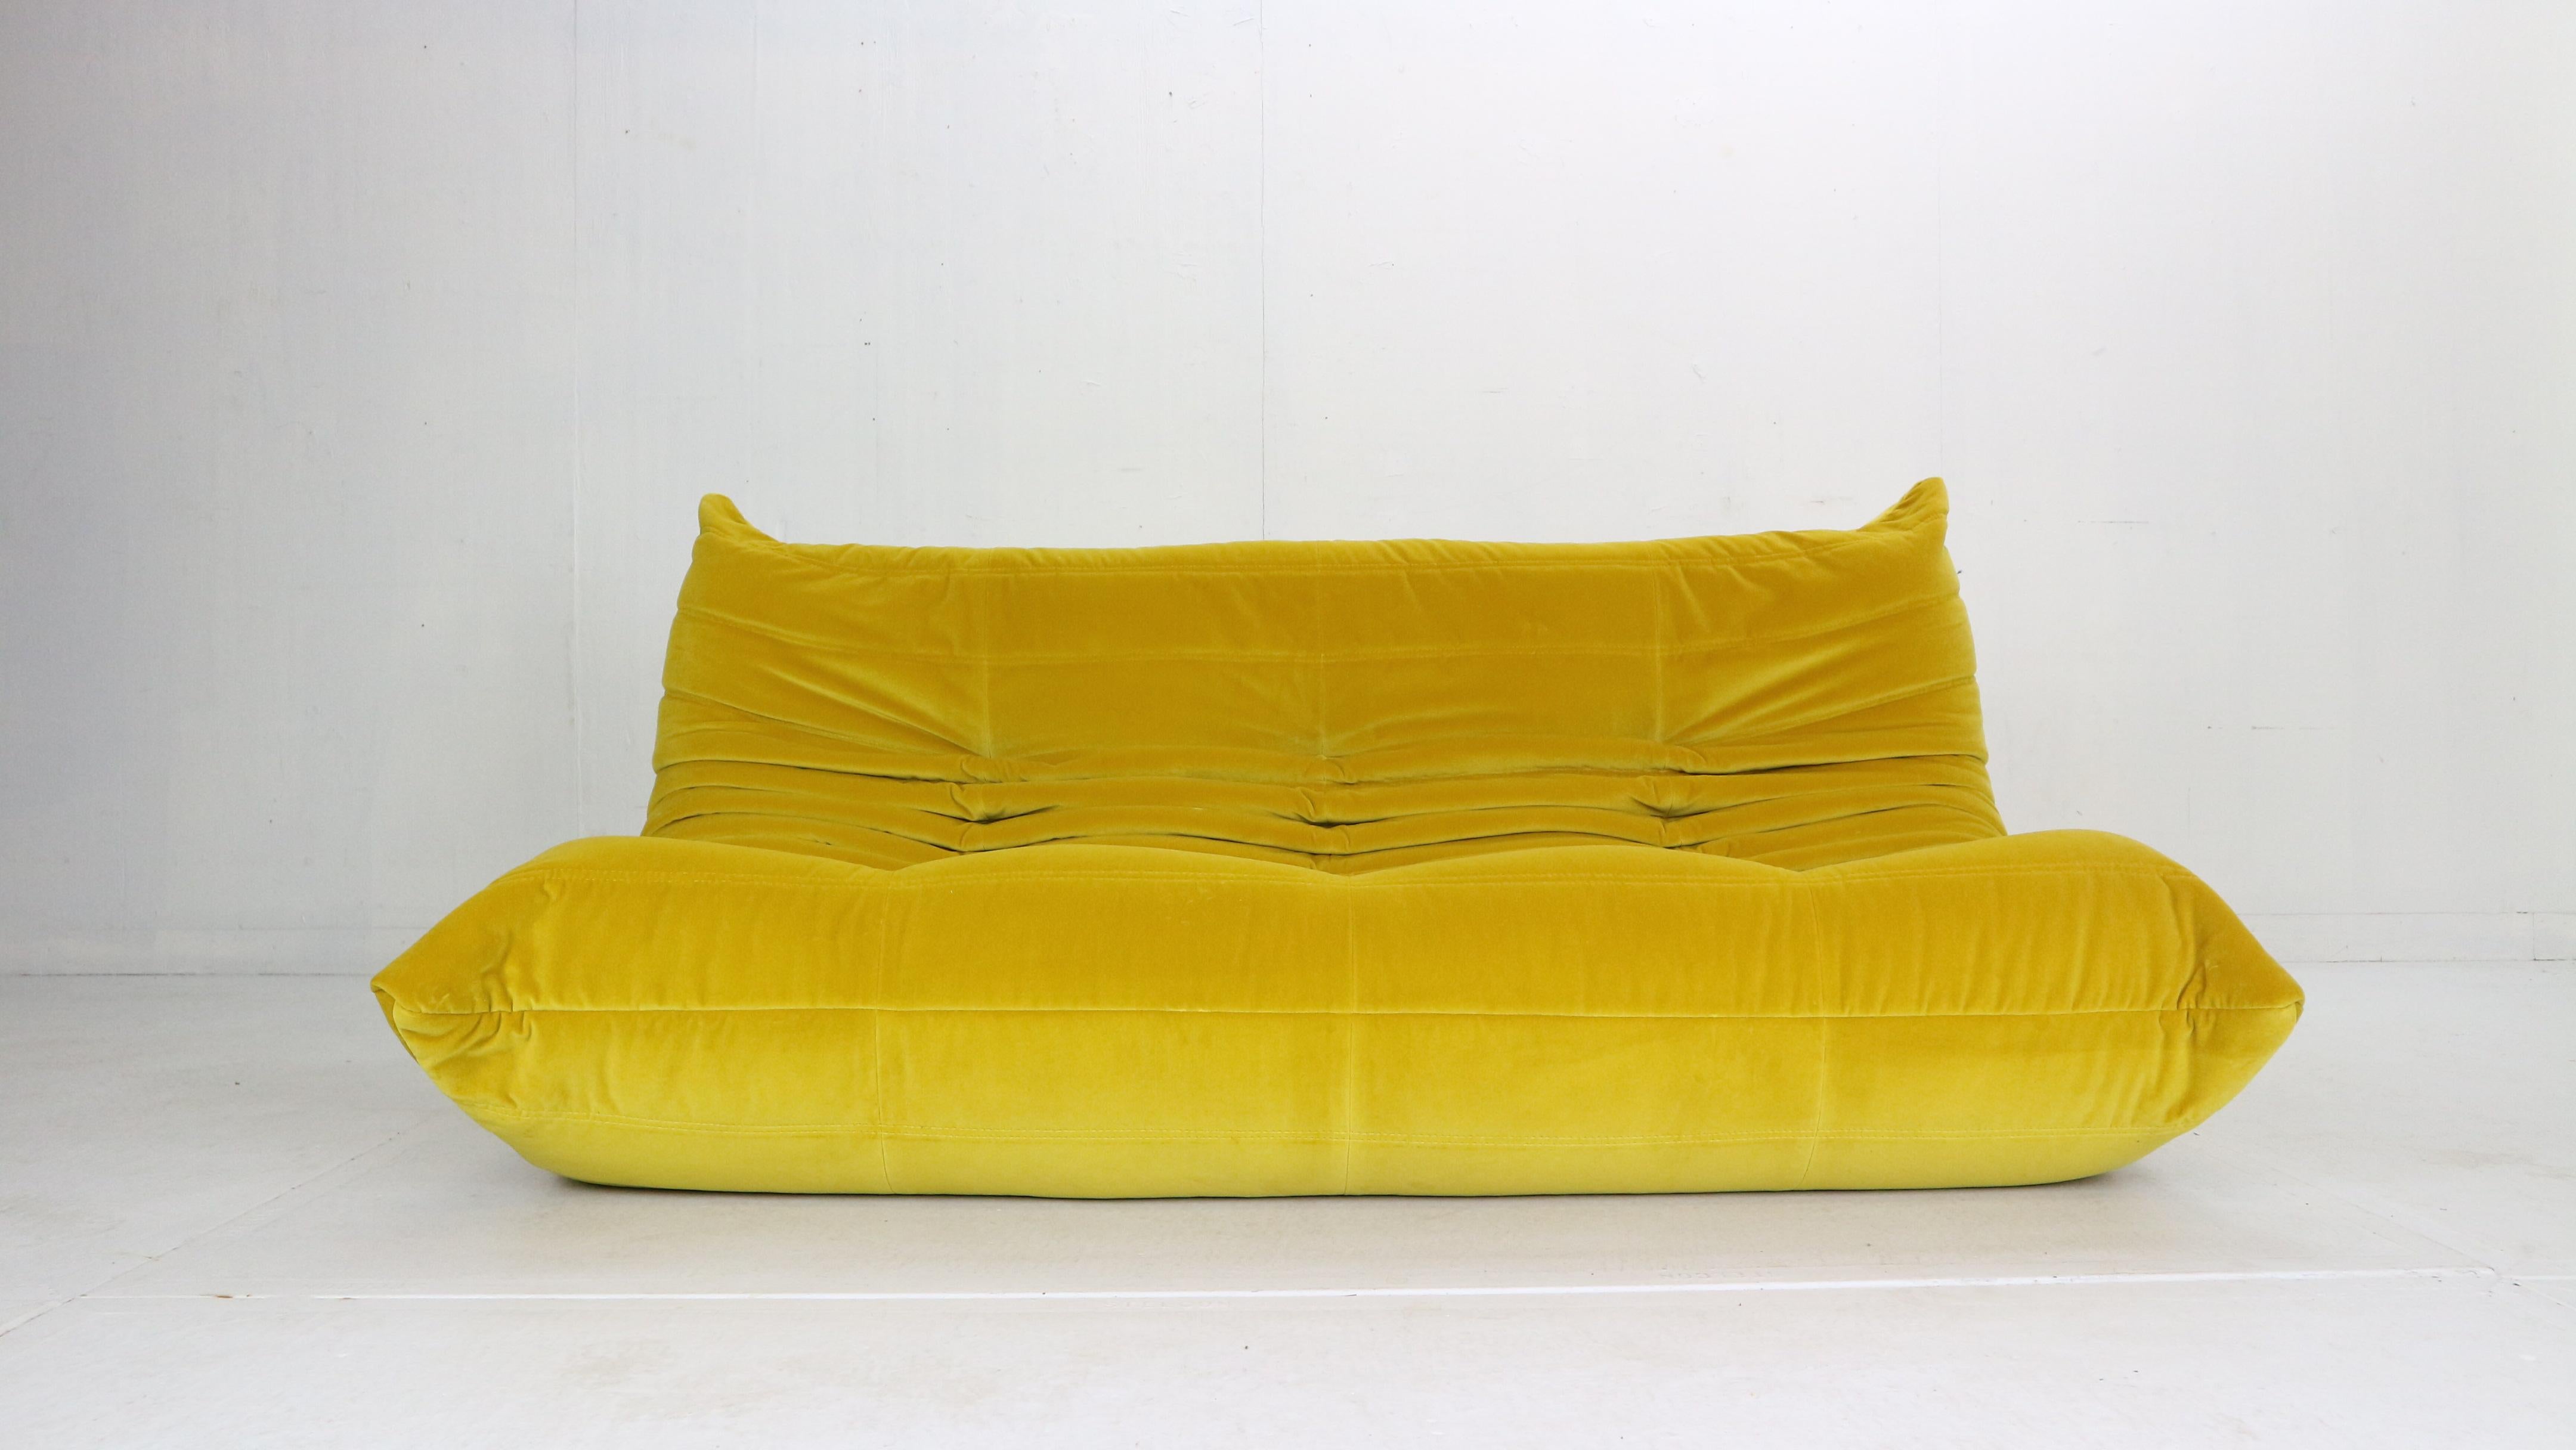 Magnificent Togo three seater lounge sofa designed by Michel Ducaroy in 1973 and was manufactured by Ligne Roset in France.
Very comfortable and beautiful accent to your living room space.
It has been newly reupholstered in a yellow soft velvet